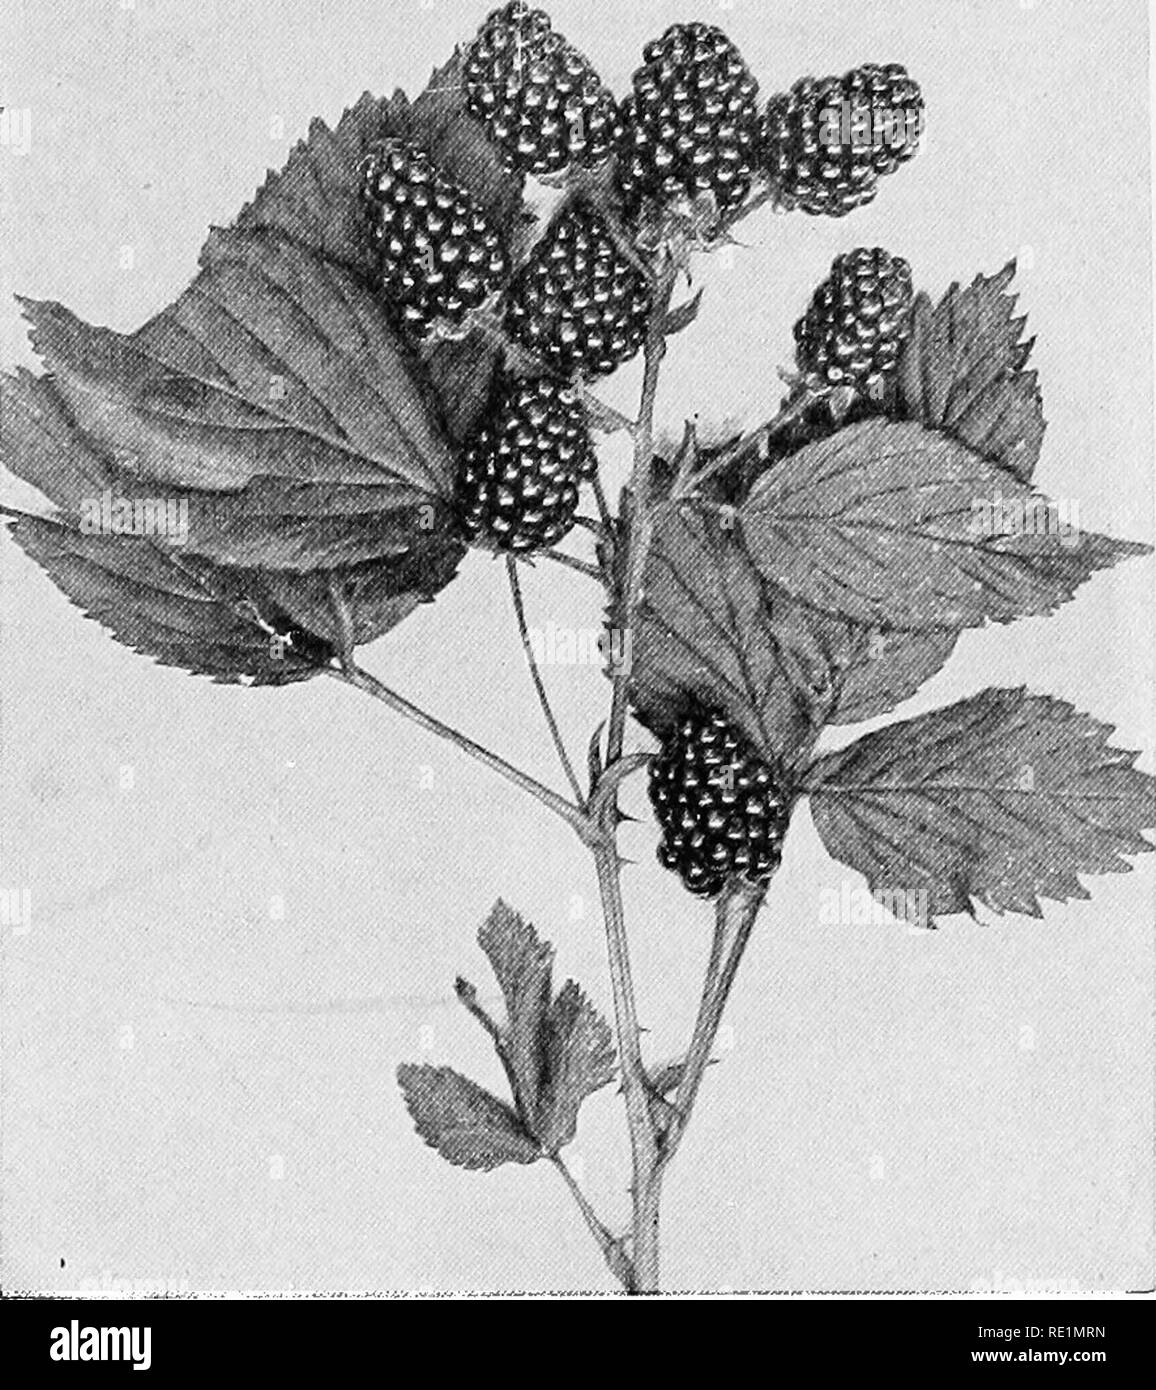 . College botany; structure, physiology and economics of plants. Botany. DICOTYLEDONOUS PLANTS 351 The genus Rubus includes the many species and varietiee of the blackberries, dewberries and raspberries (Figs. 189, 190). Sub-Family—Potentillece (Strawberries).—Ovaries supe- rior, carpels few to many, becoming dry achenes; fruit a mass of dry achenes or a pulpy receptacle, bearing minute, dry achenes.. Fig. 190.—Blackberry, a-form o'i aggregate fruit. The g.entis Fragaria includes the many species and varieties of the strawberrj^ (Figs. 191, 192, 193). LEGUMiNOSiE (Pea or Pulse Family).—Herbs,  Stock Photo